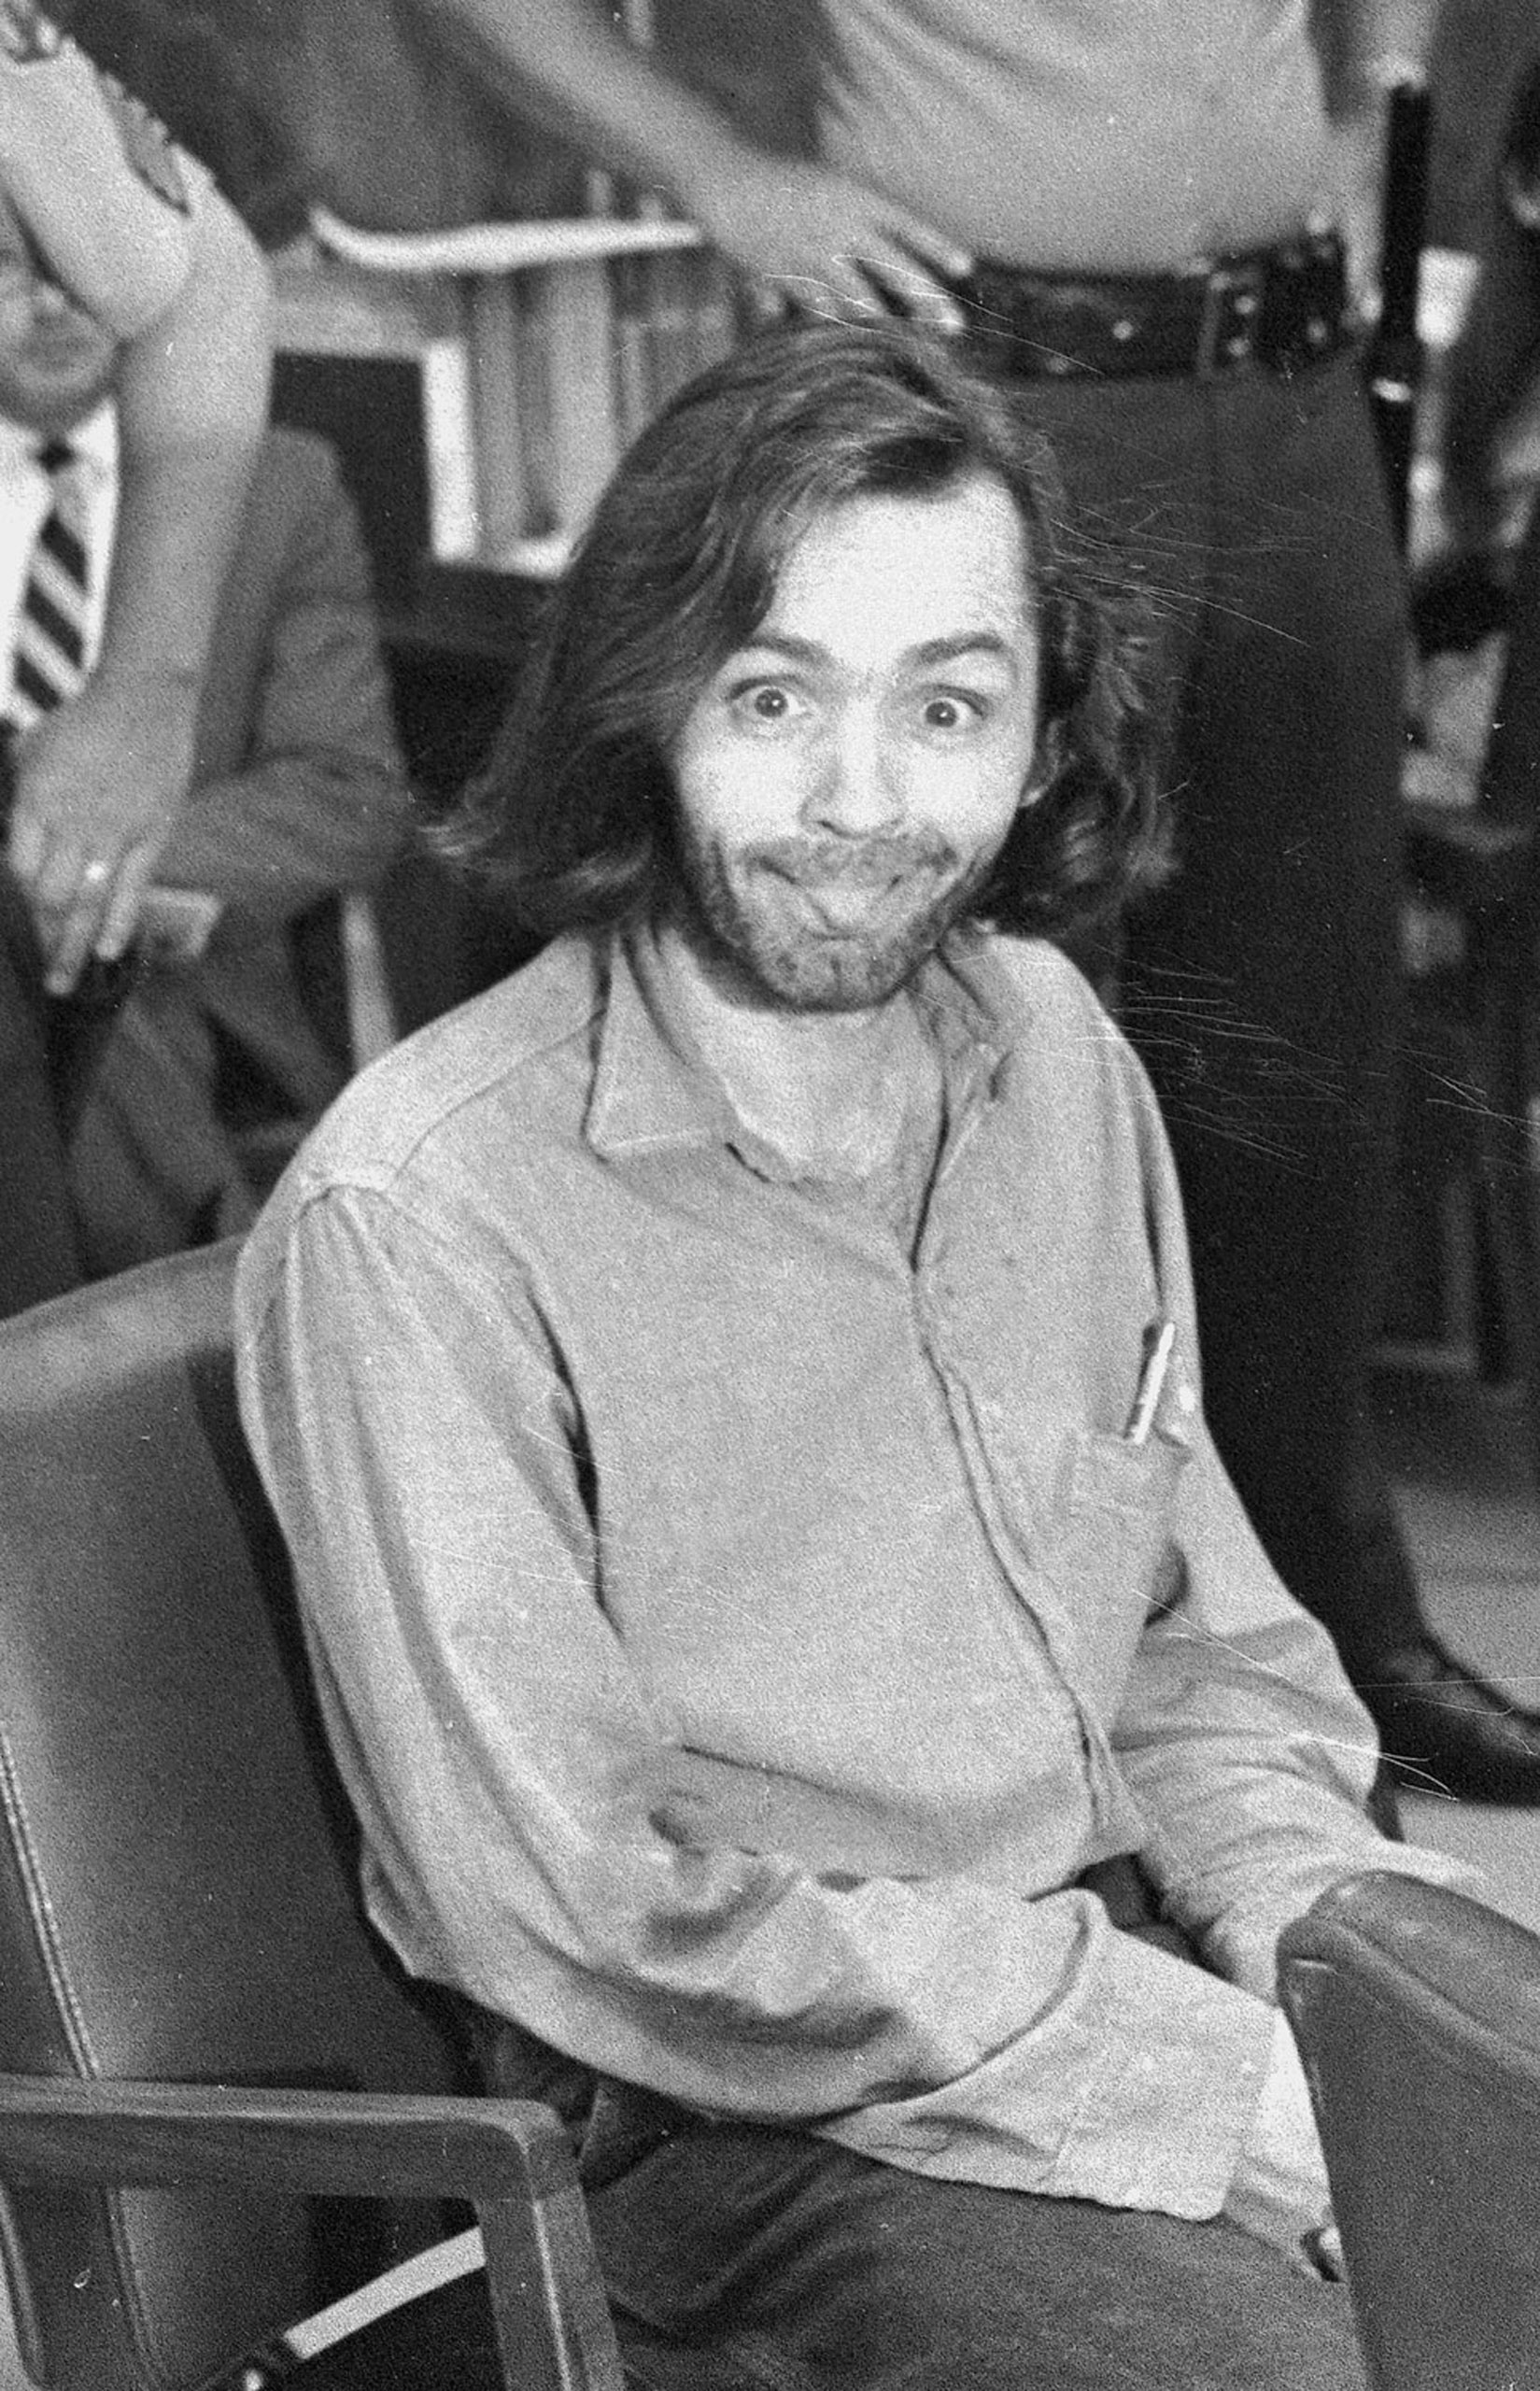 Manson sticks his tongue out at photographers as he appears in a Santa Monica, Calif., courtroom on June 25, 1970.